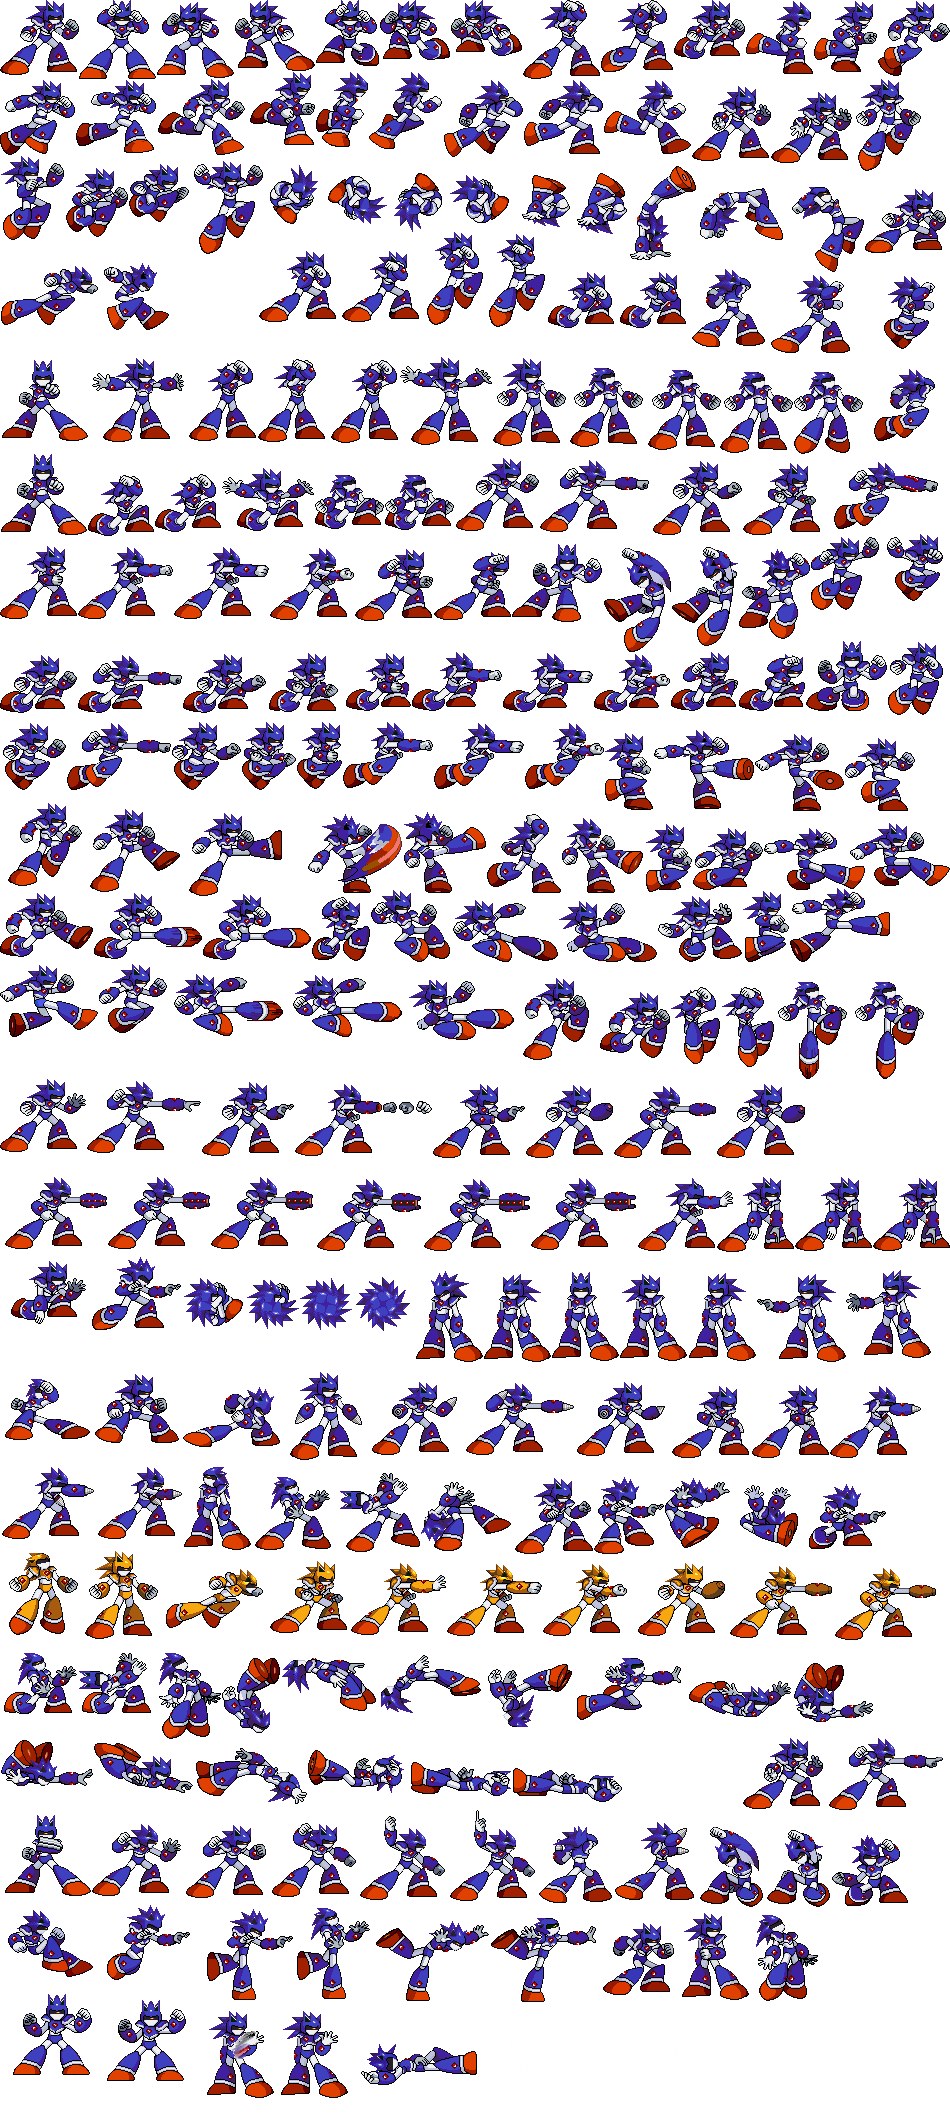 Mecha Sonic Sprites png images